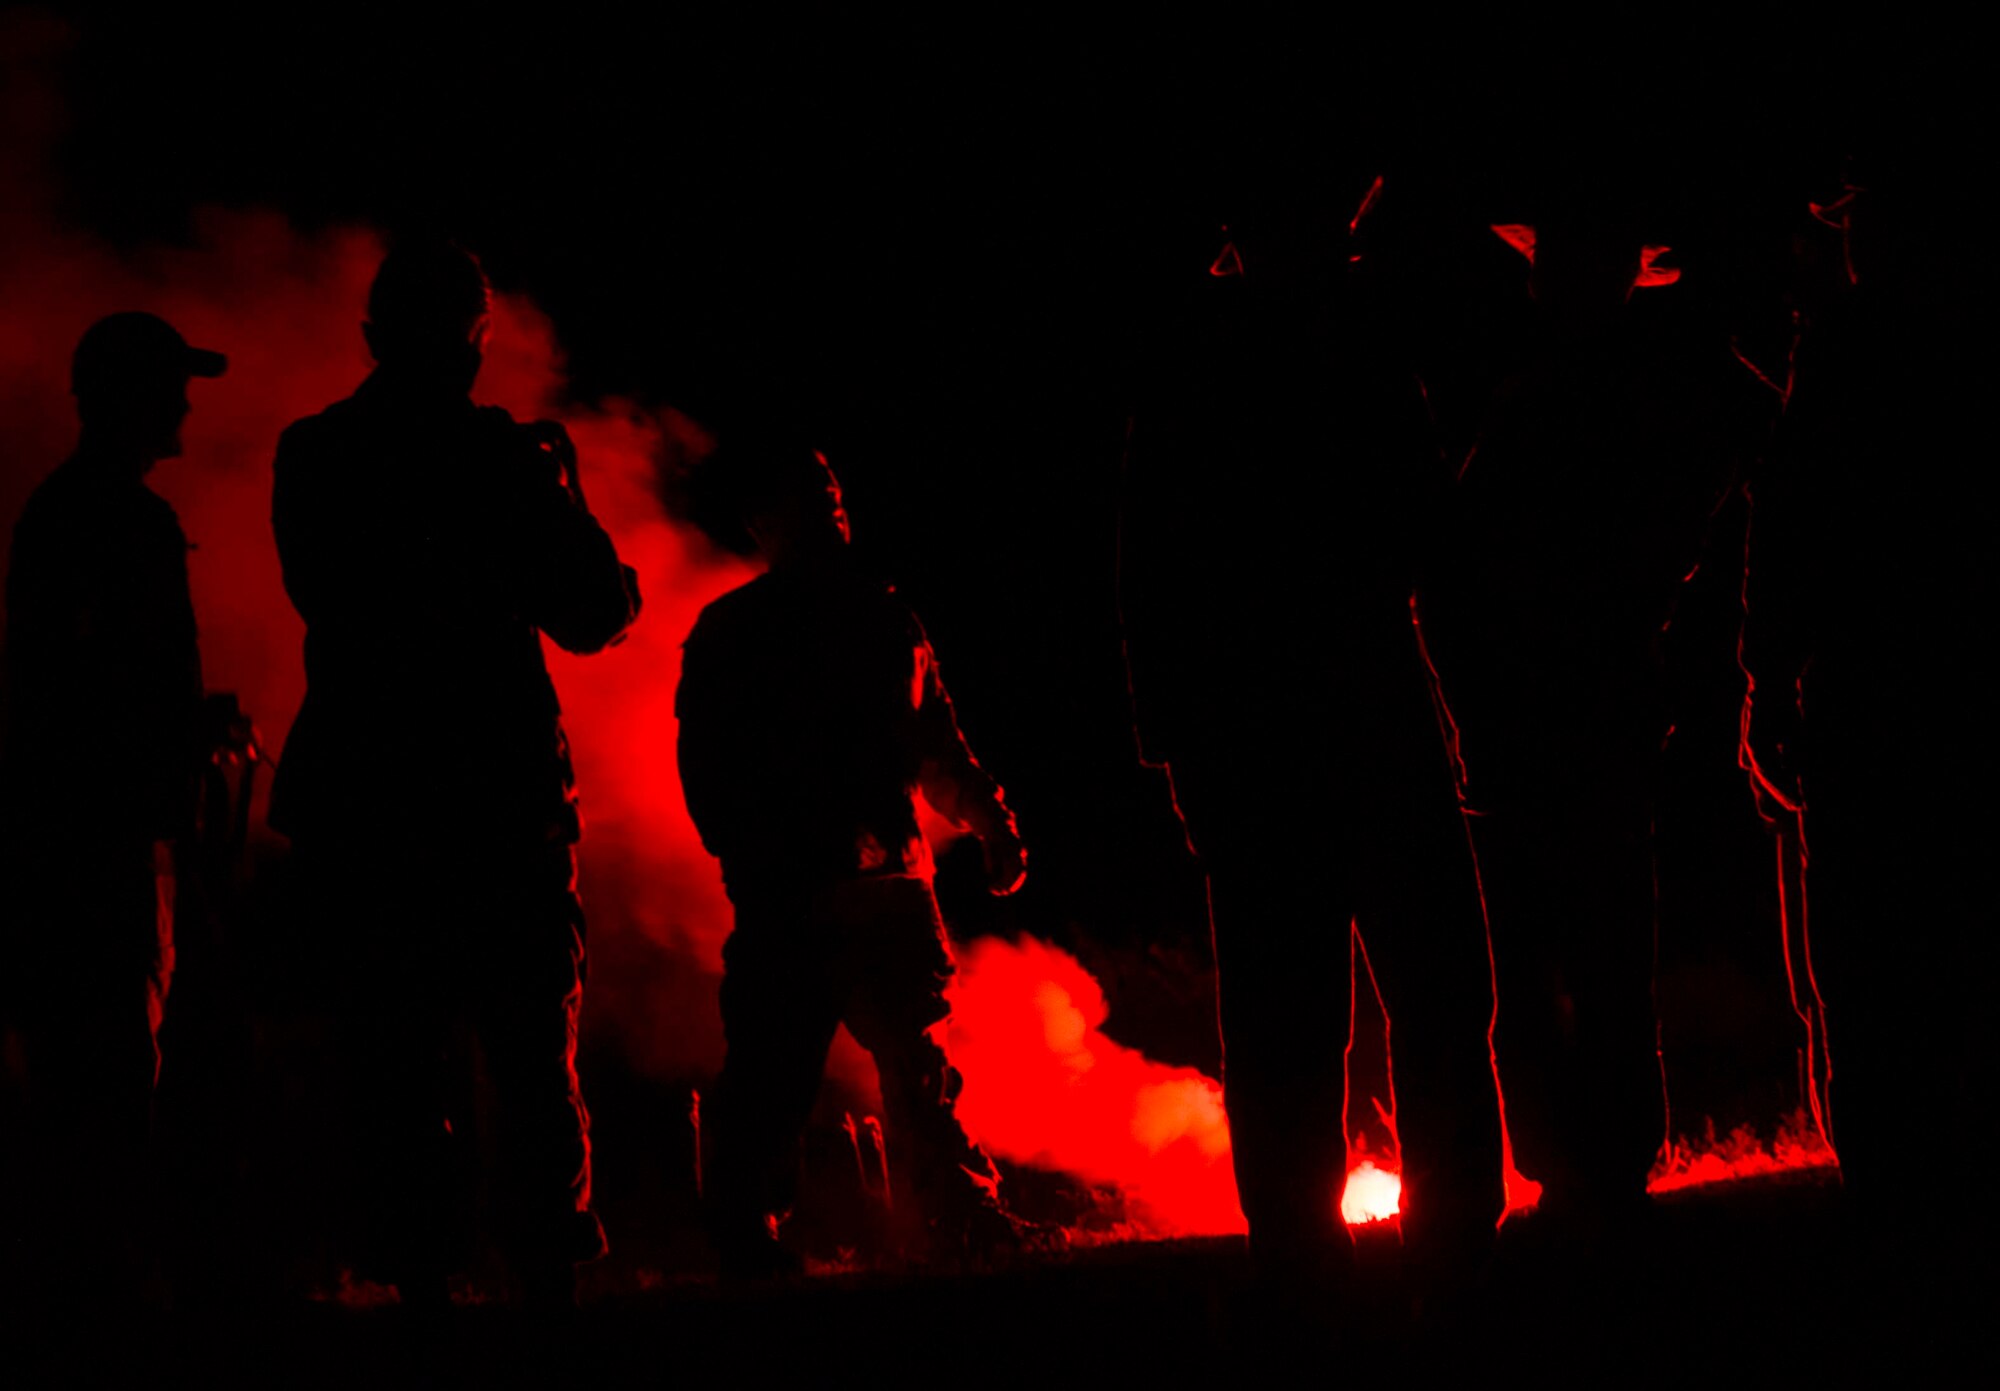 Team Minot Airmen use flares during survival, evasion, resistance and escape training in Garrison, N.D., Aug. 11, 2016. Aircrew members are required to complete SERE training to prepare themselves for potential hostile situations. (U.S. Air Force photo/Senior Airman Apryl Hall)